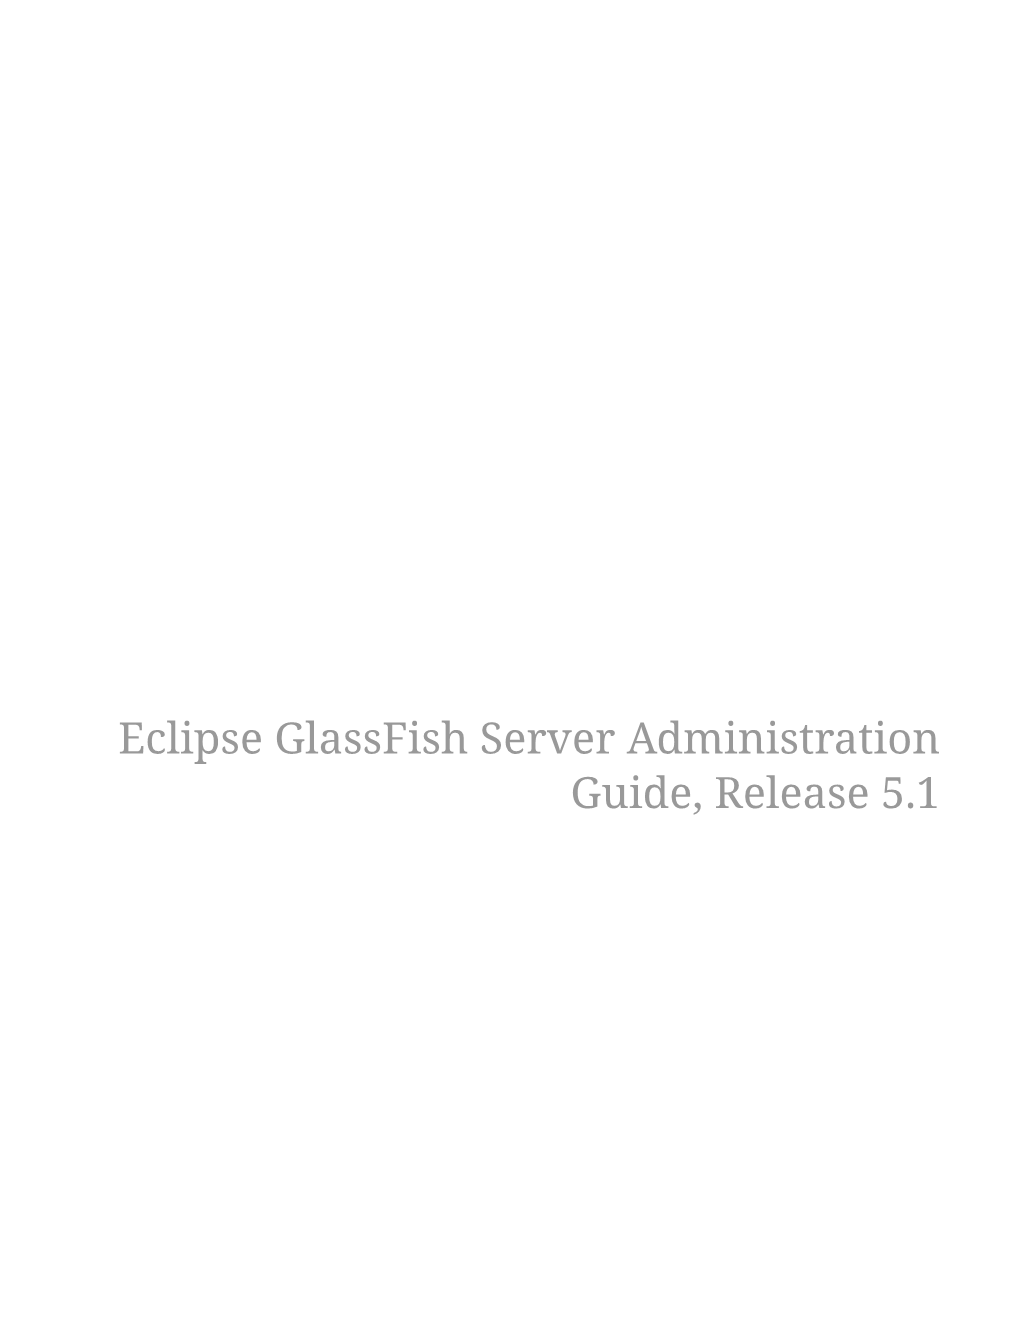 Eclipse Glassfish Server Administration Guide, Release 5.1 Table of Contents